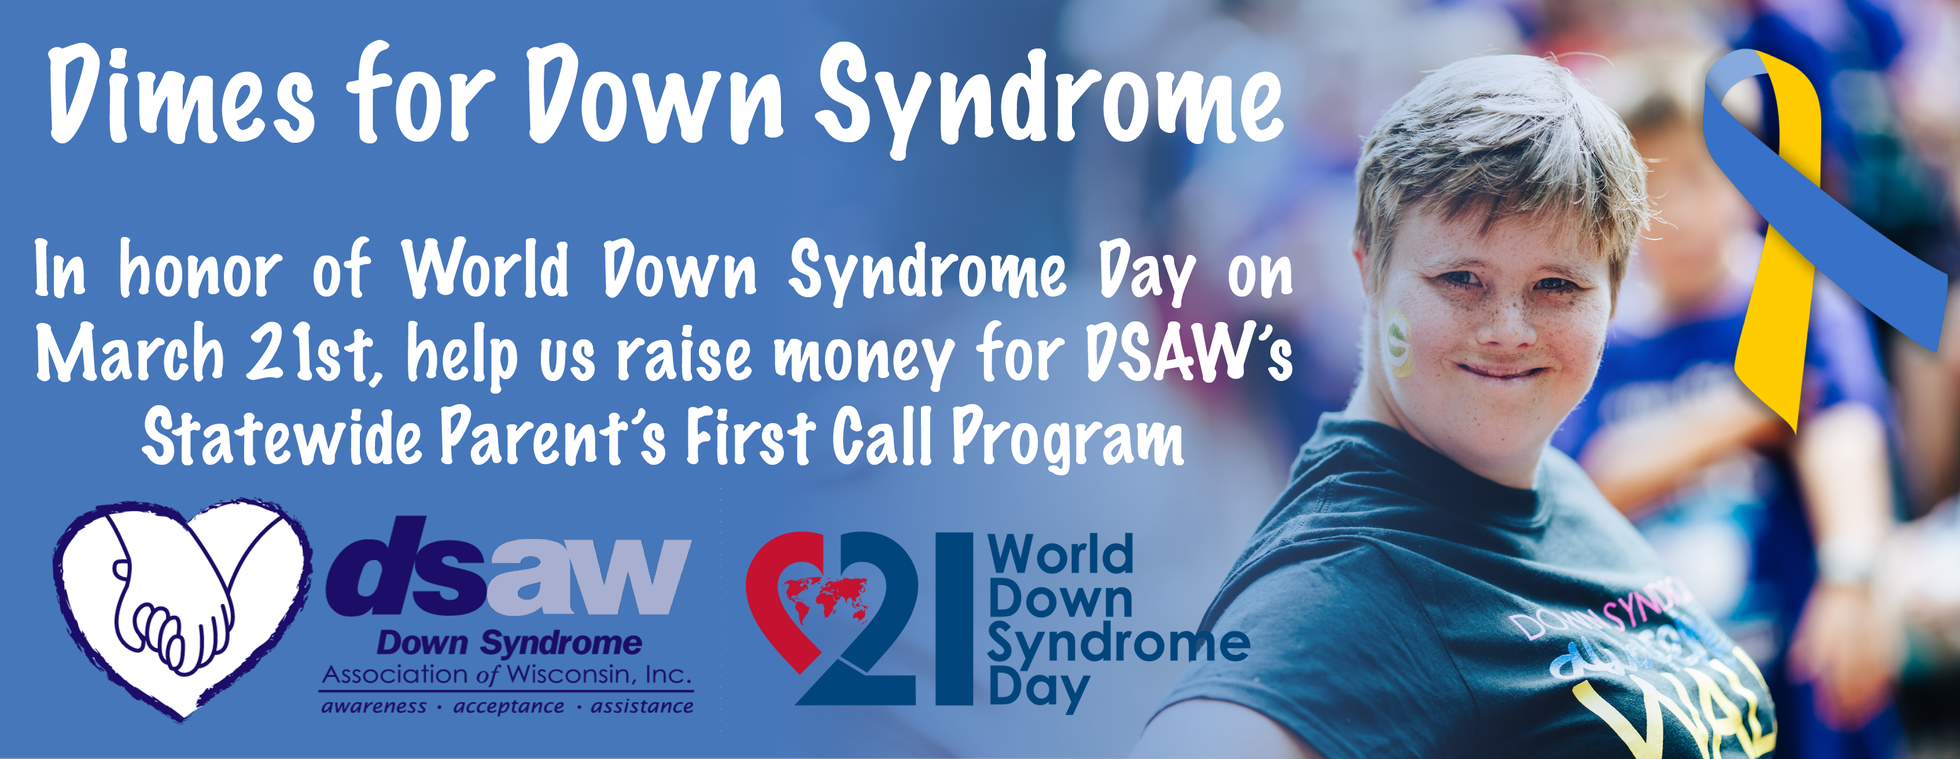 World Down Syndrome Day 2017